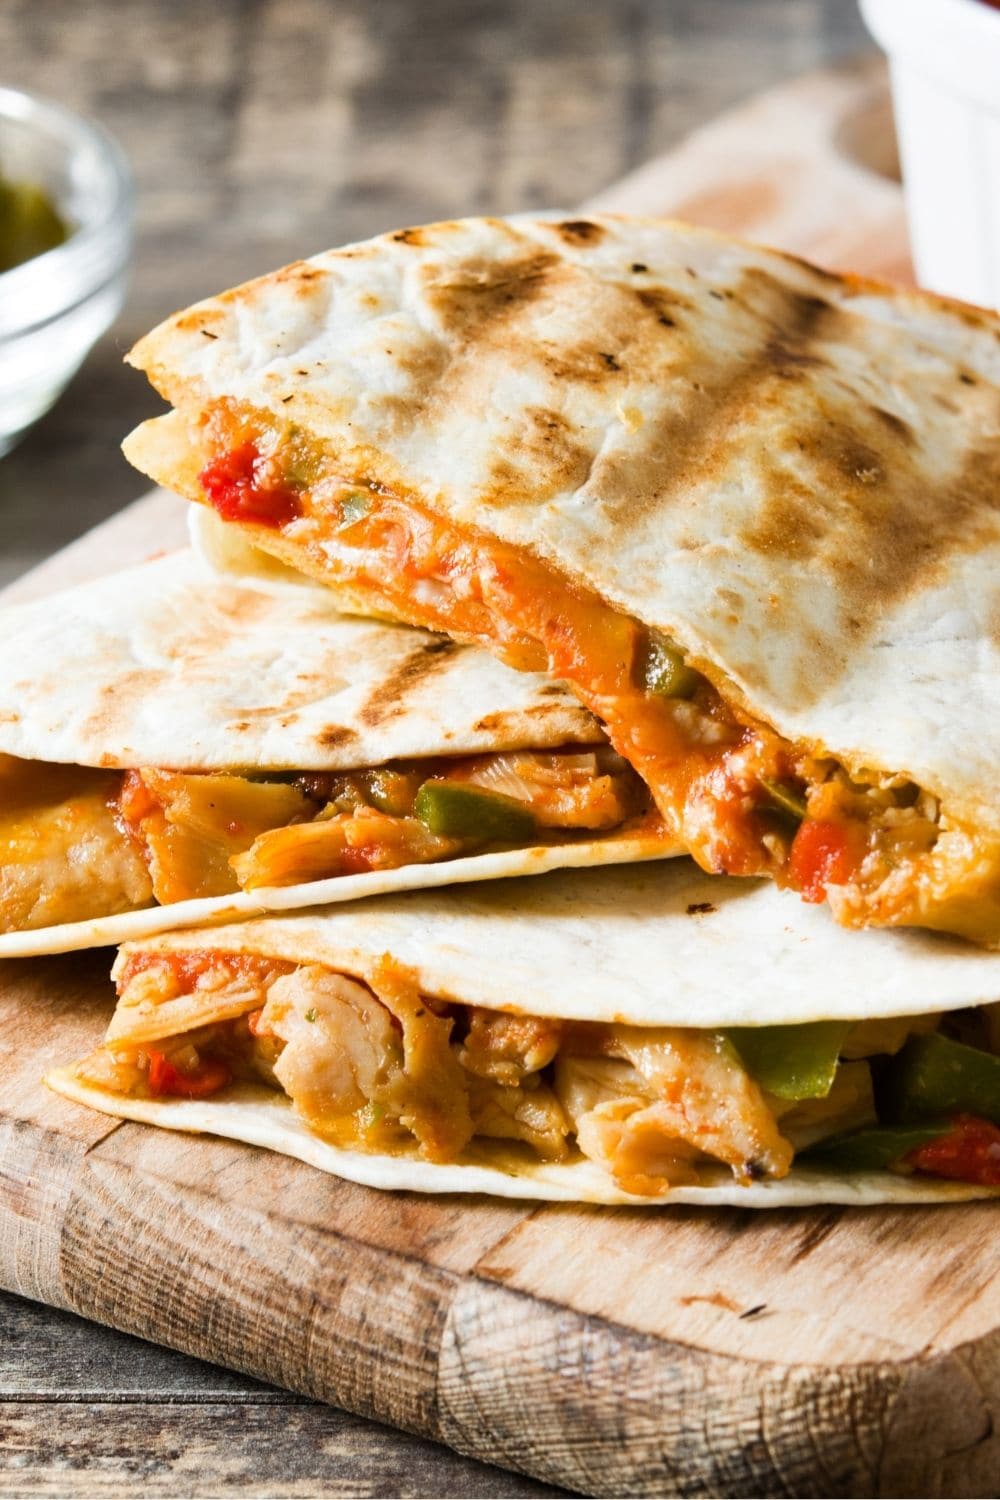 Tortillas with chicken, bell peppers and cheese filling, stacked on top of each other on a wooden board